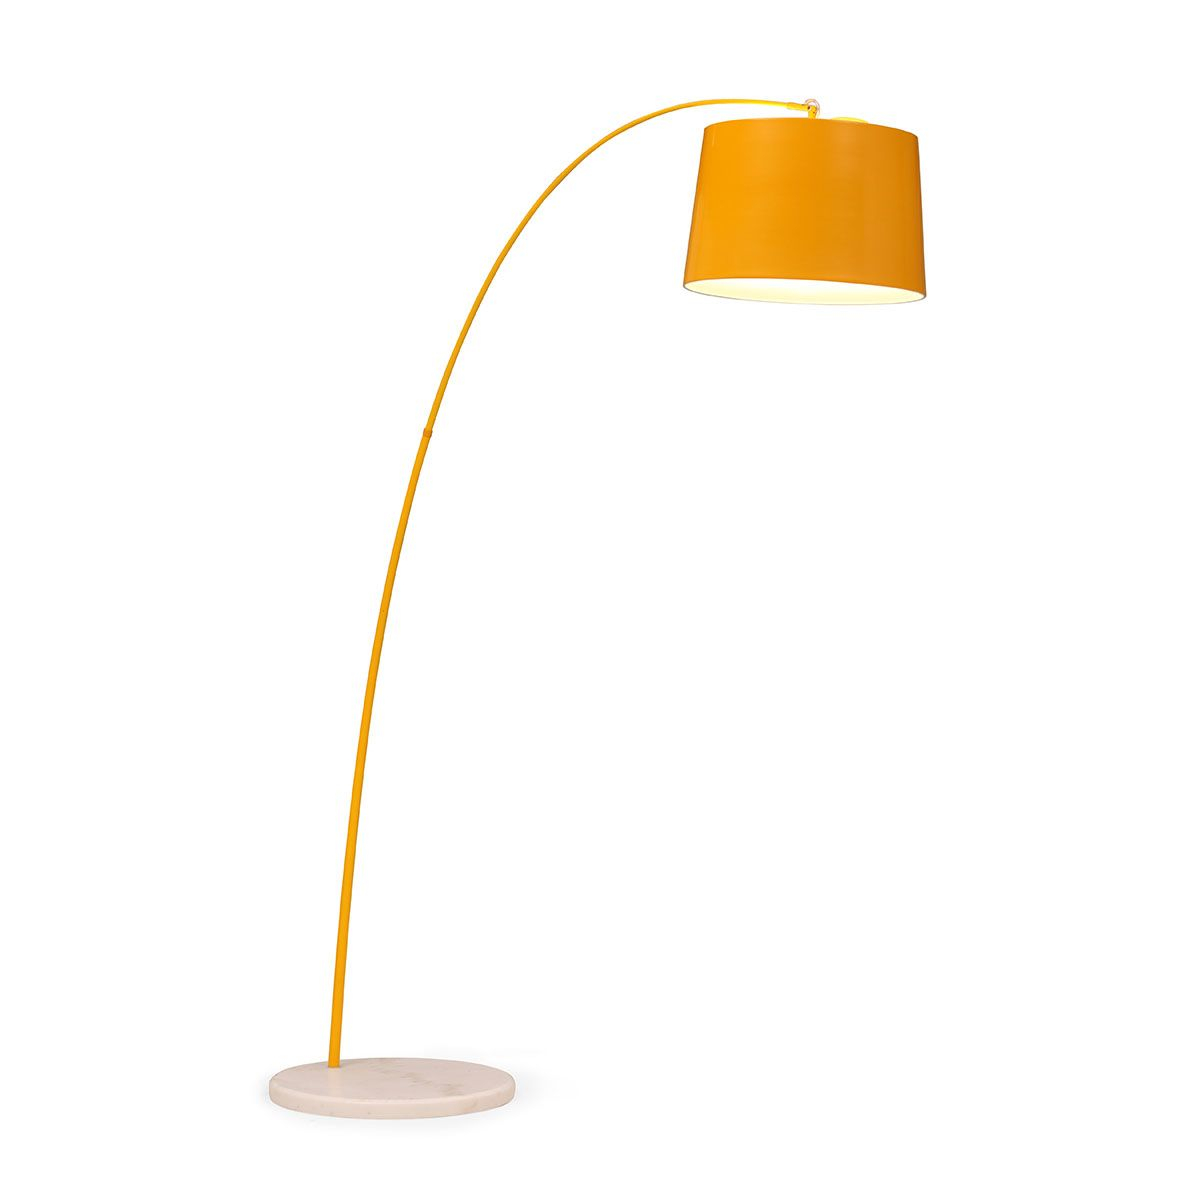 An Arched Chrome Floor Lamp In Yellow Arc Lamp Decor inside sizing 1200 X 1200